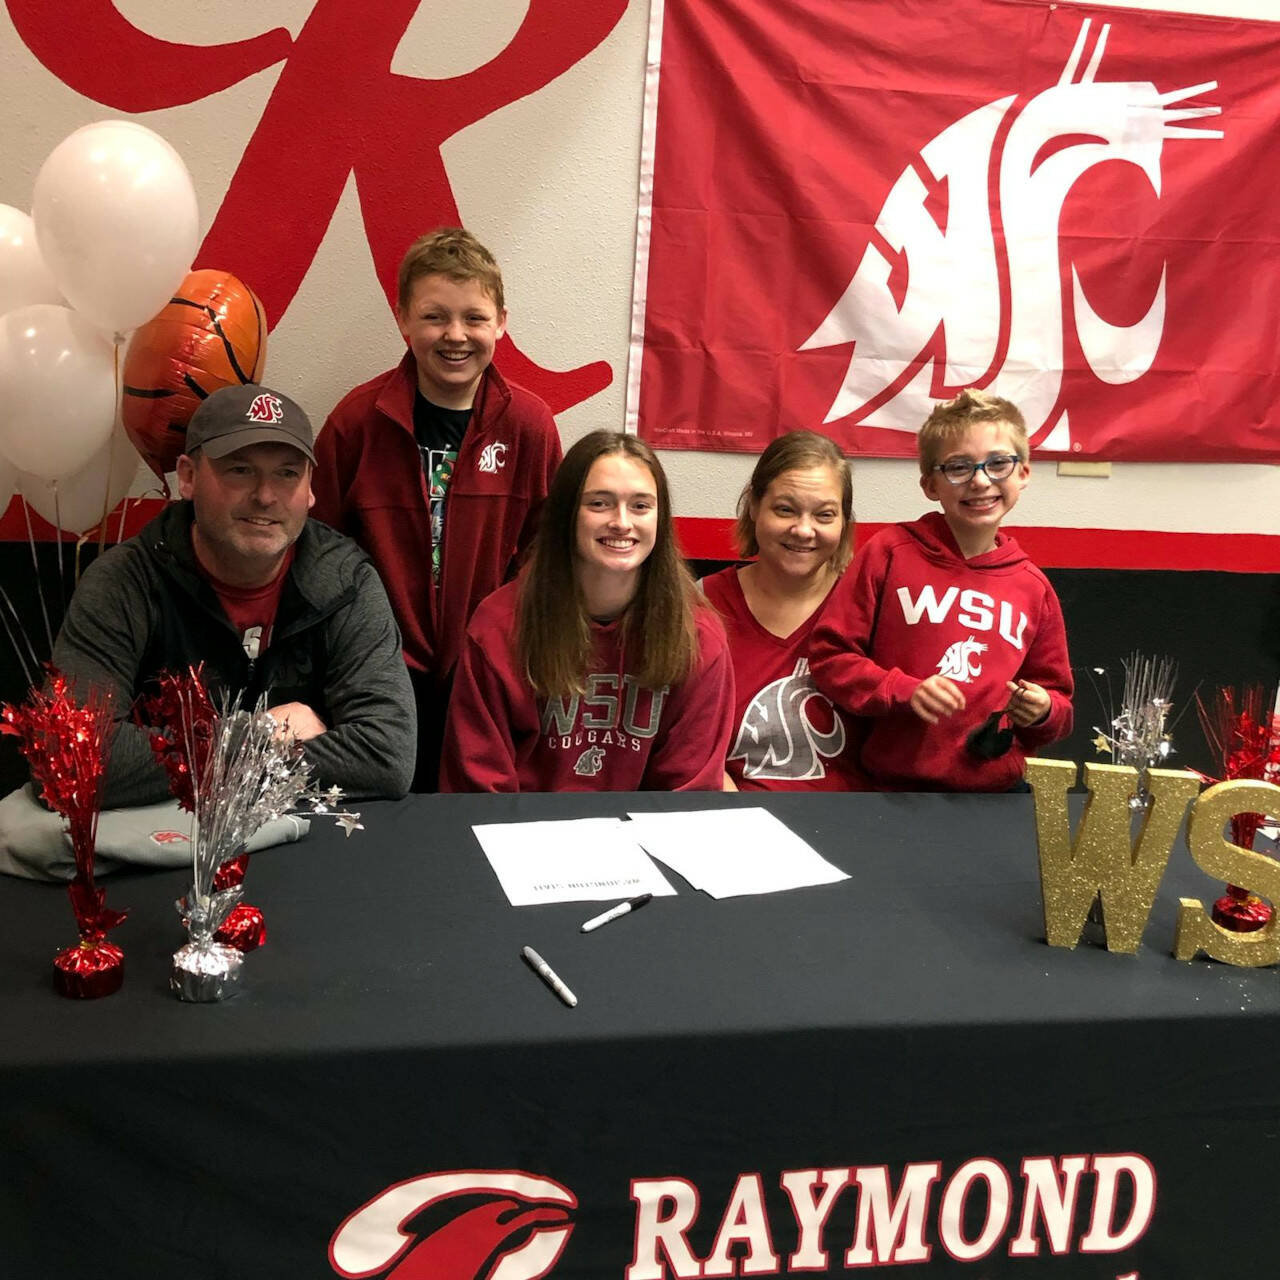 SUBMITTED PHOTO Raymond standout student-athlete Kyra Gardner, middle, is flanked by family members (from left) father Jamie, brother Thomas, mother Julie and brother Jordan during a ceremony on Tuesday after signing a National Letter of Intent to play women’s basketball at Washington State in the fall.